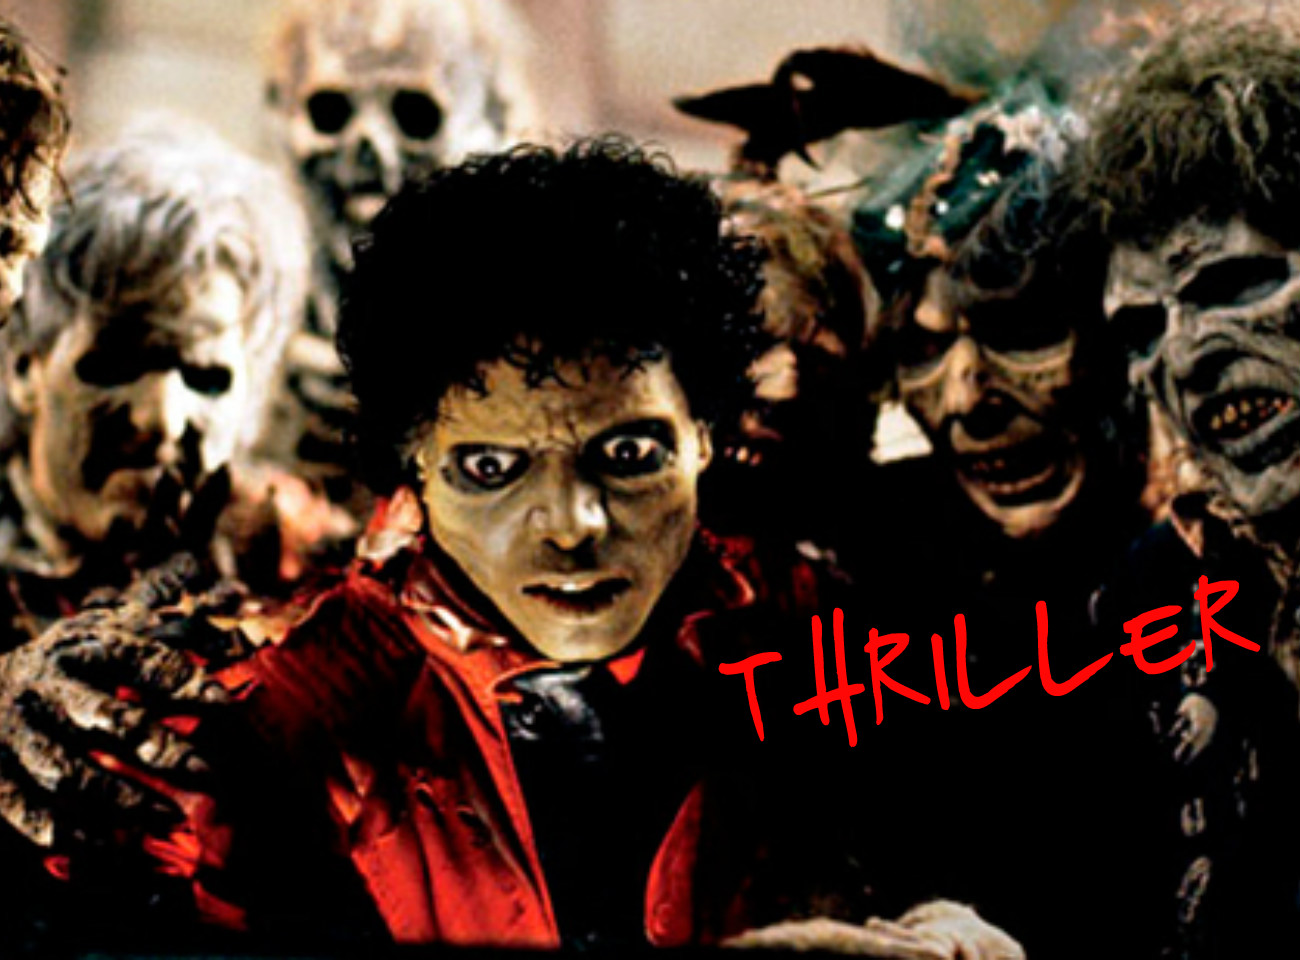 Thriller mp3 download mp3 mp4 player free download